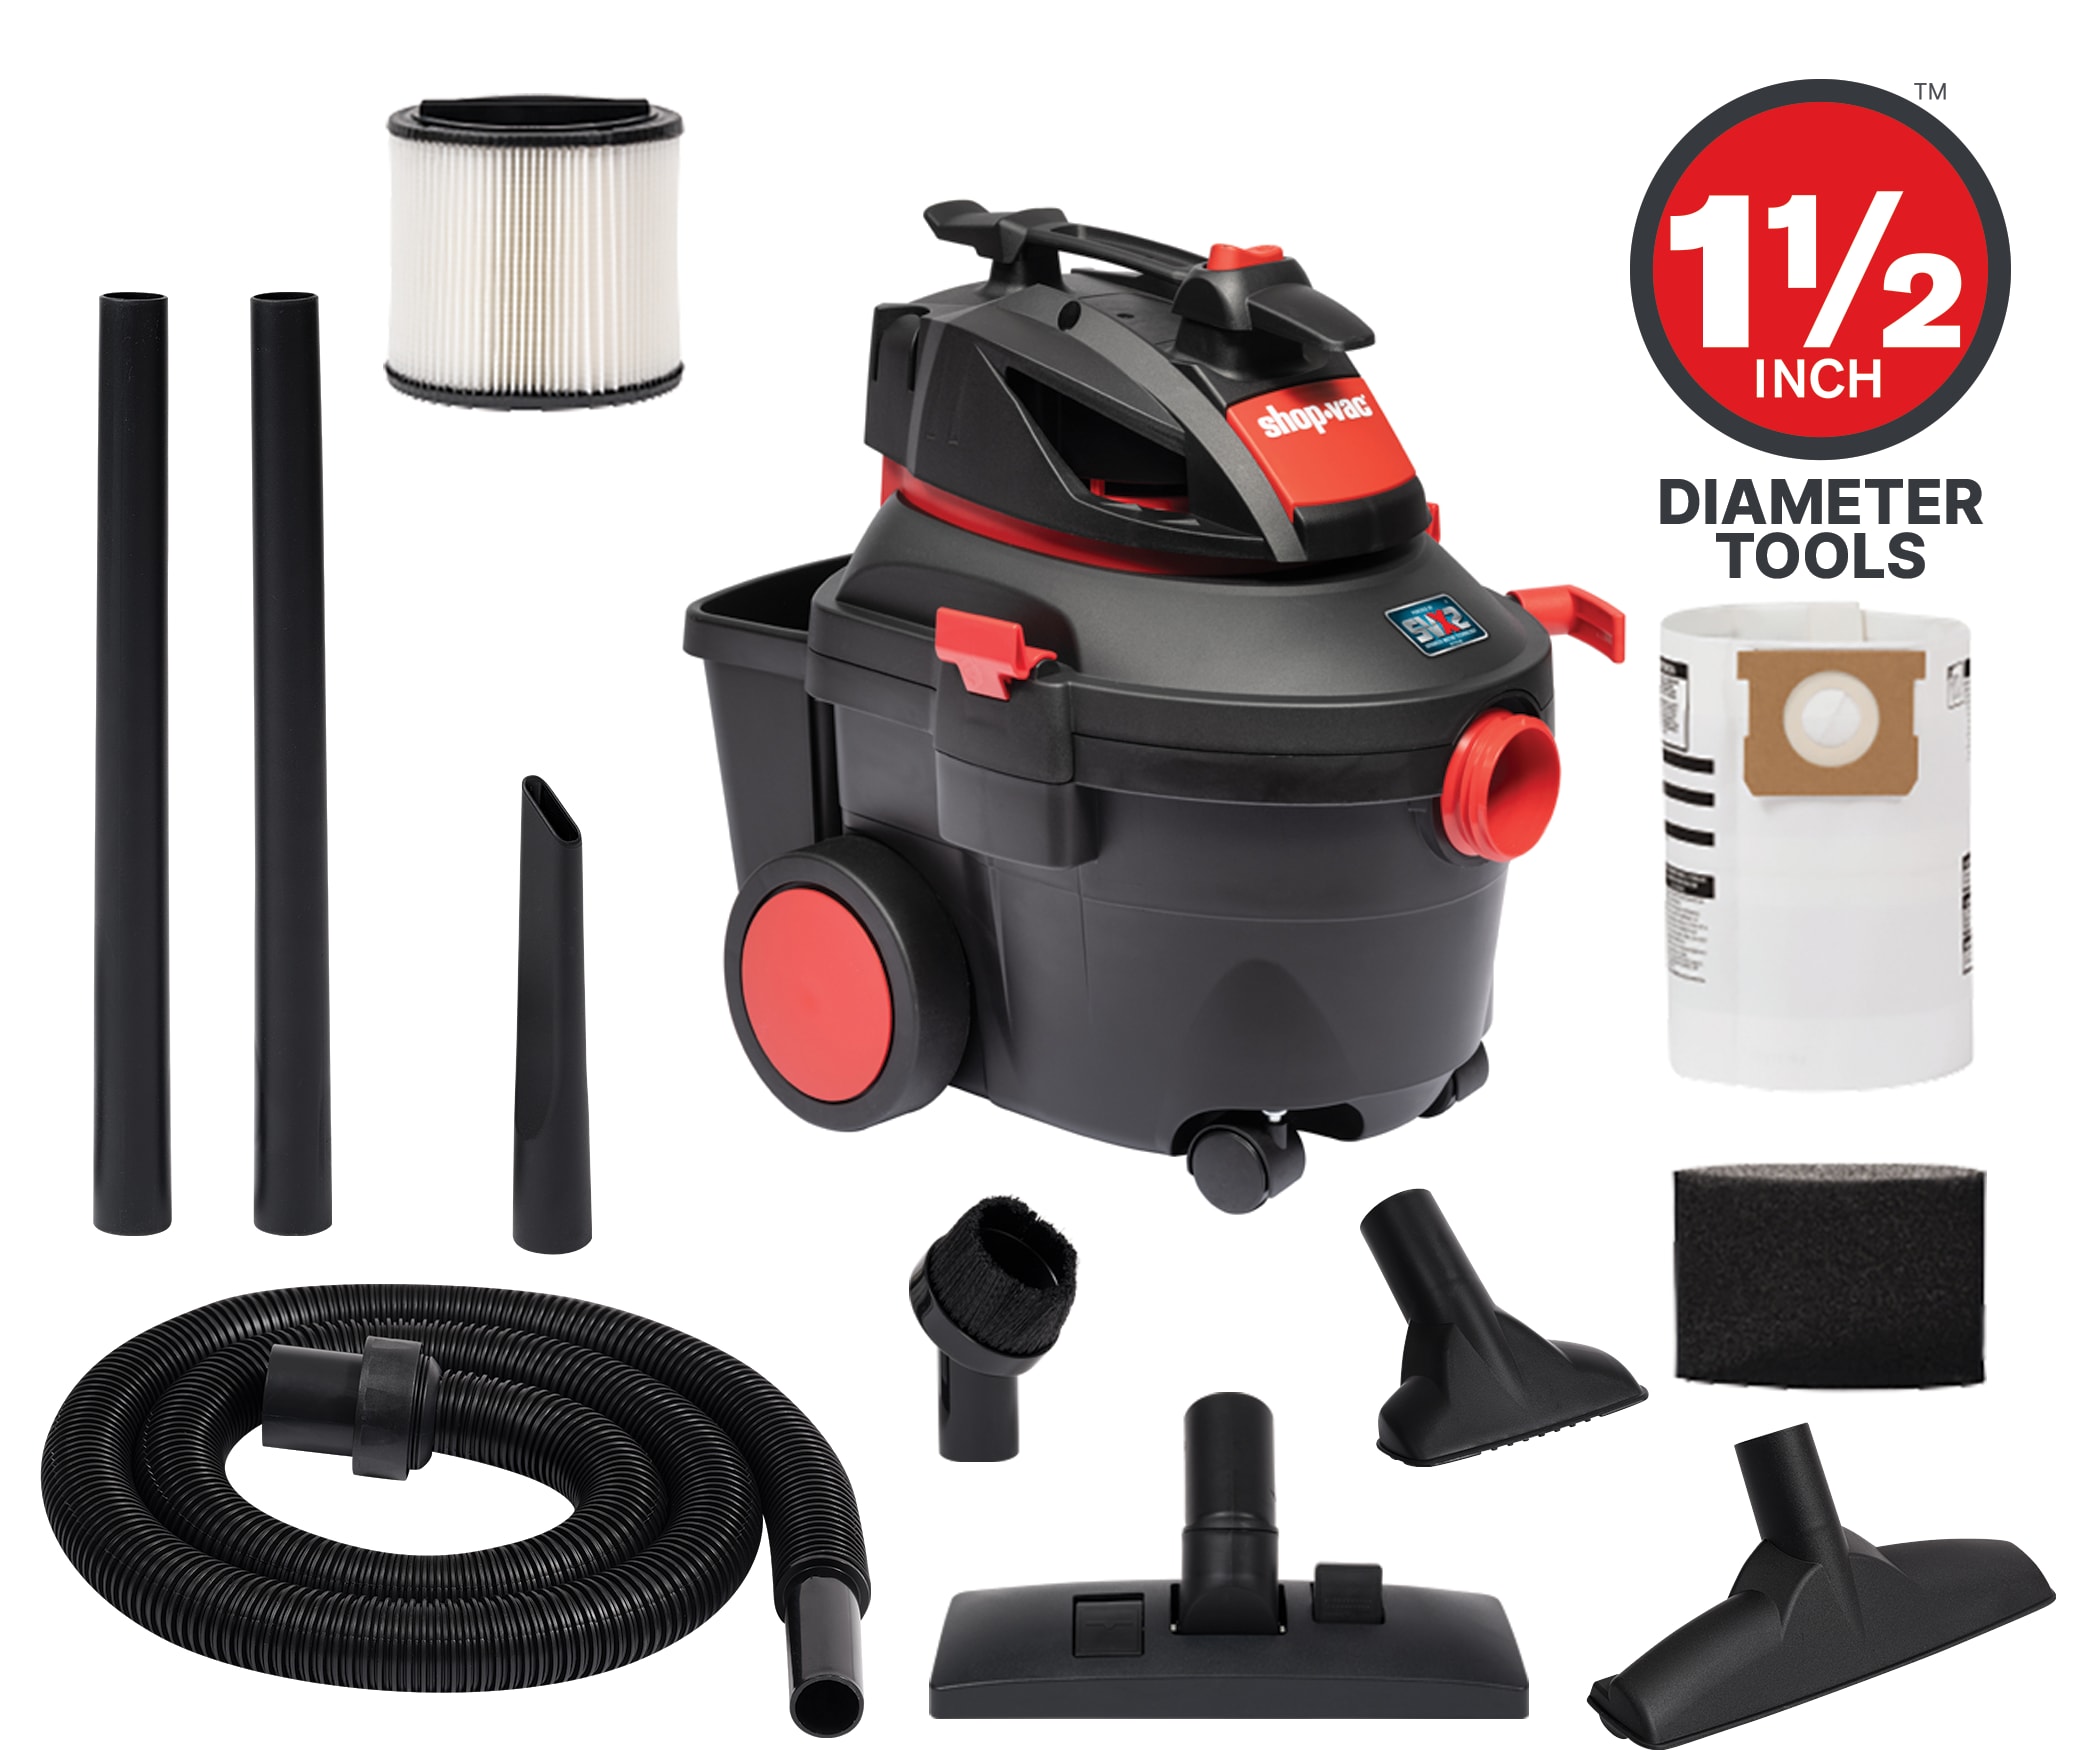 Shop-Vac 4-Gallons 5.5-HP Corded Wet/Dry Shop Vacuum with Accessories  Included